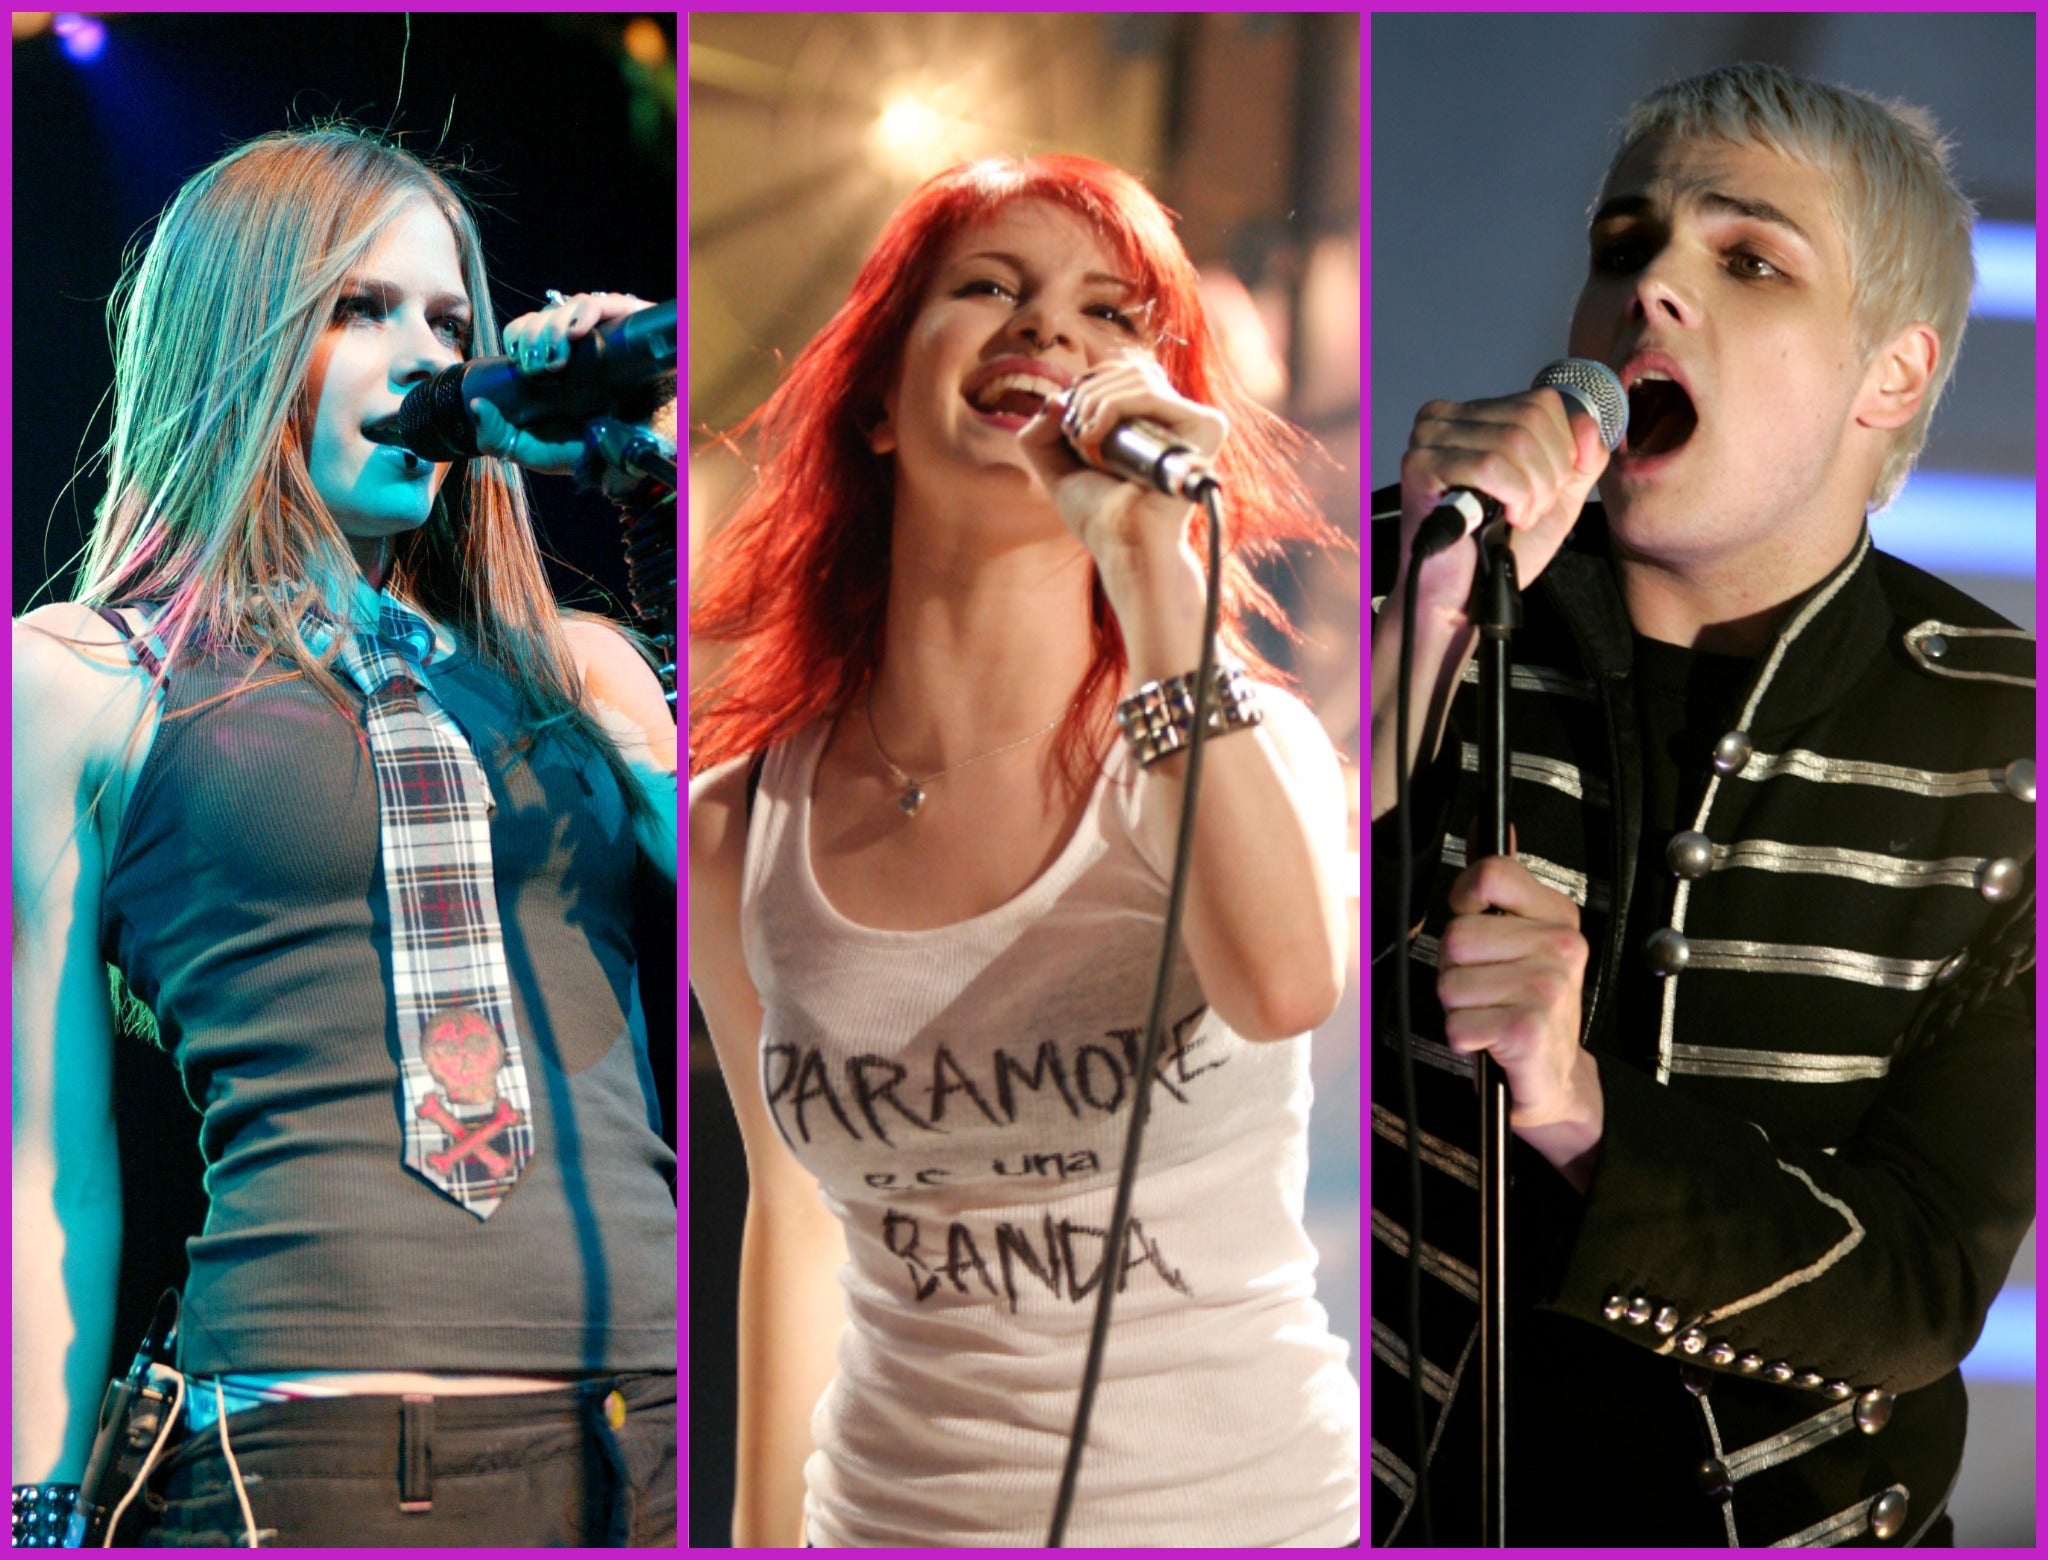 L-R: Avril Lavigne, Hayley Williams of Paramore and Gerard Way of My Chemical Romance